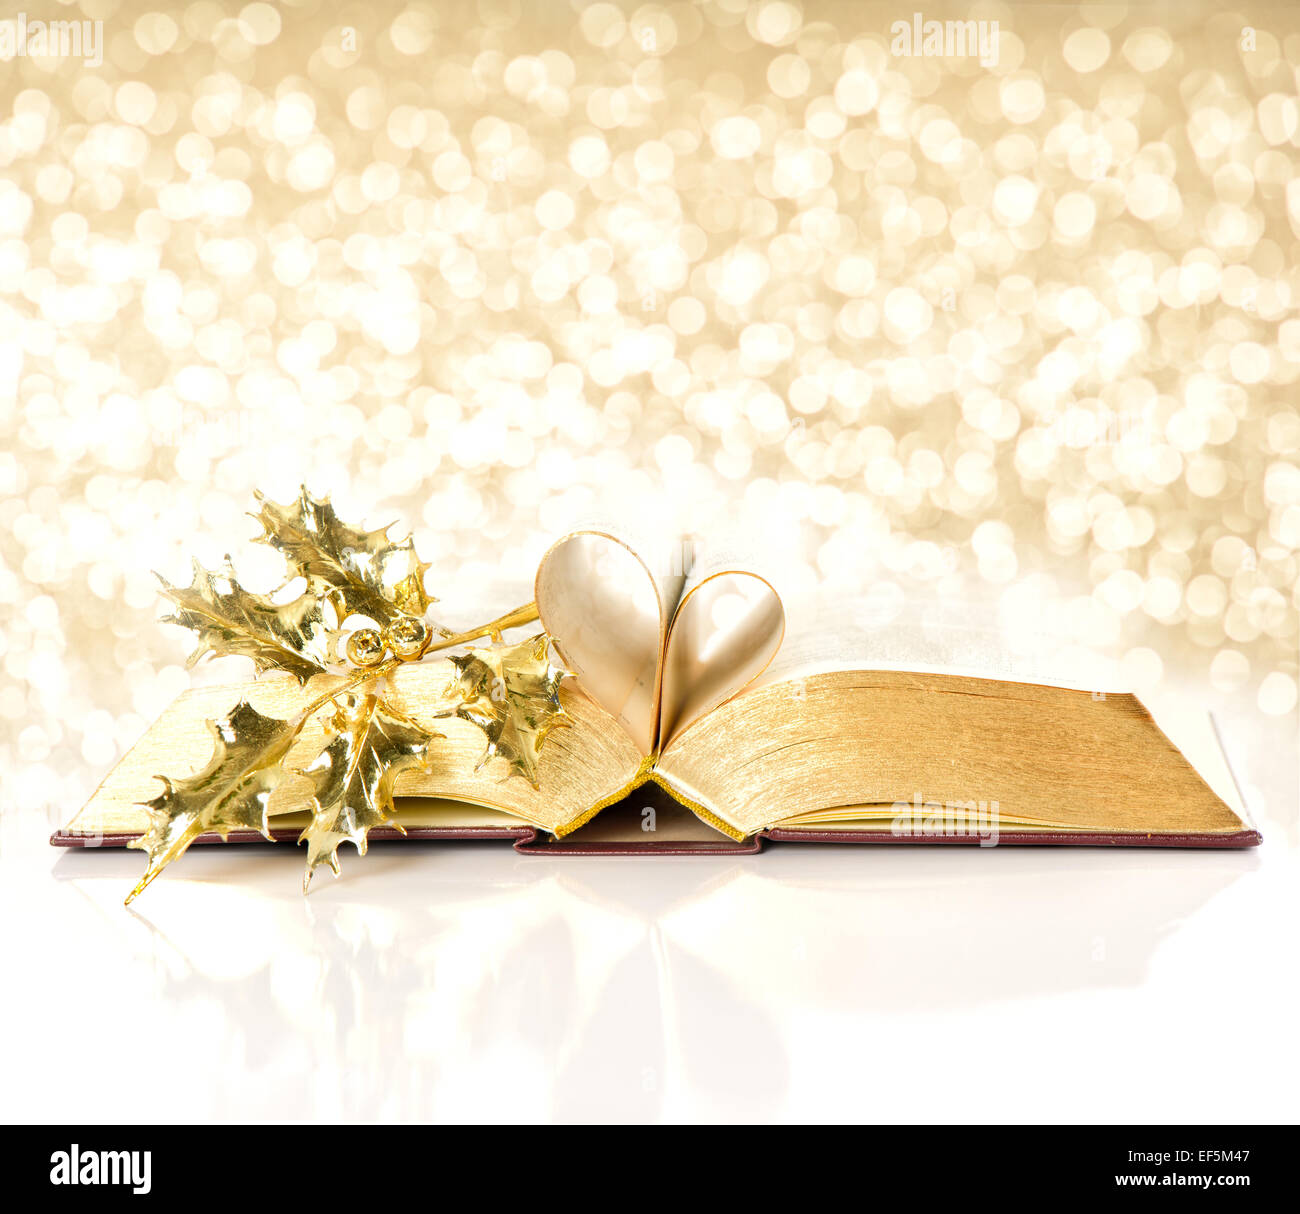 open vintage book with golden pages. bible with golden decoration. shiny lights christmas background Stock Photo